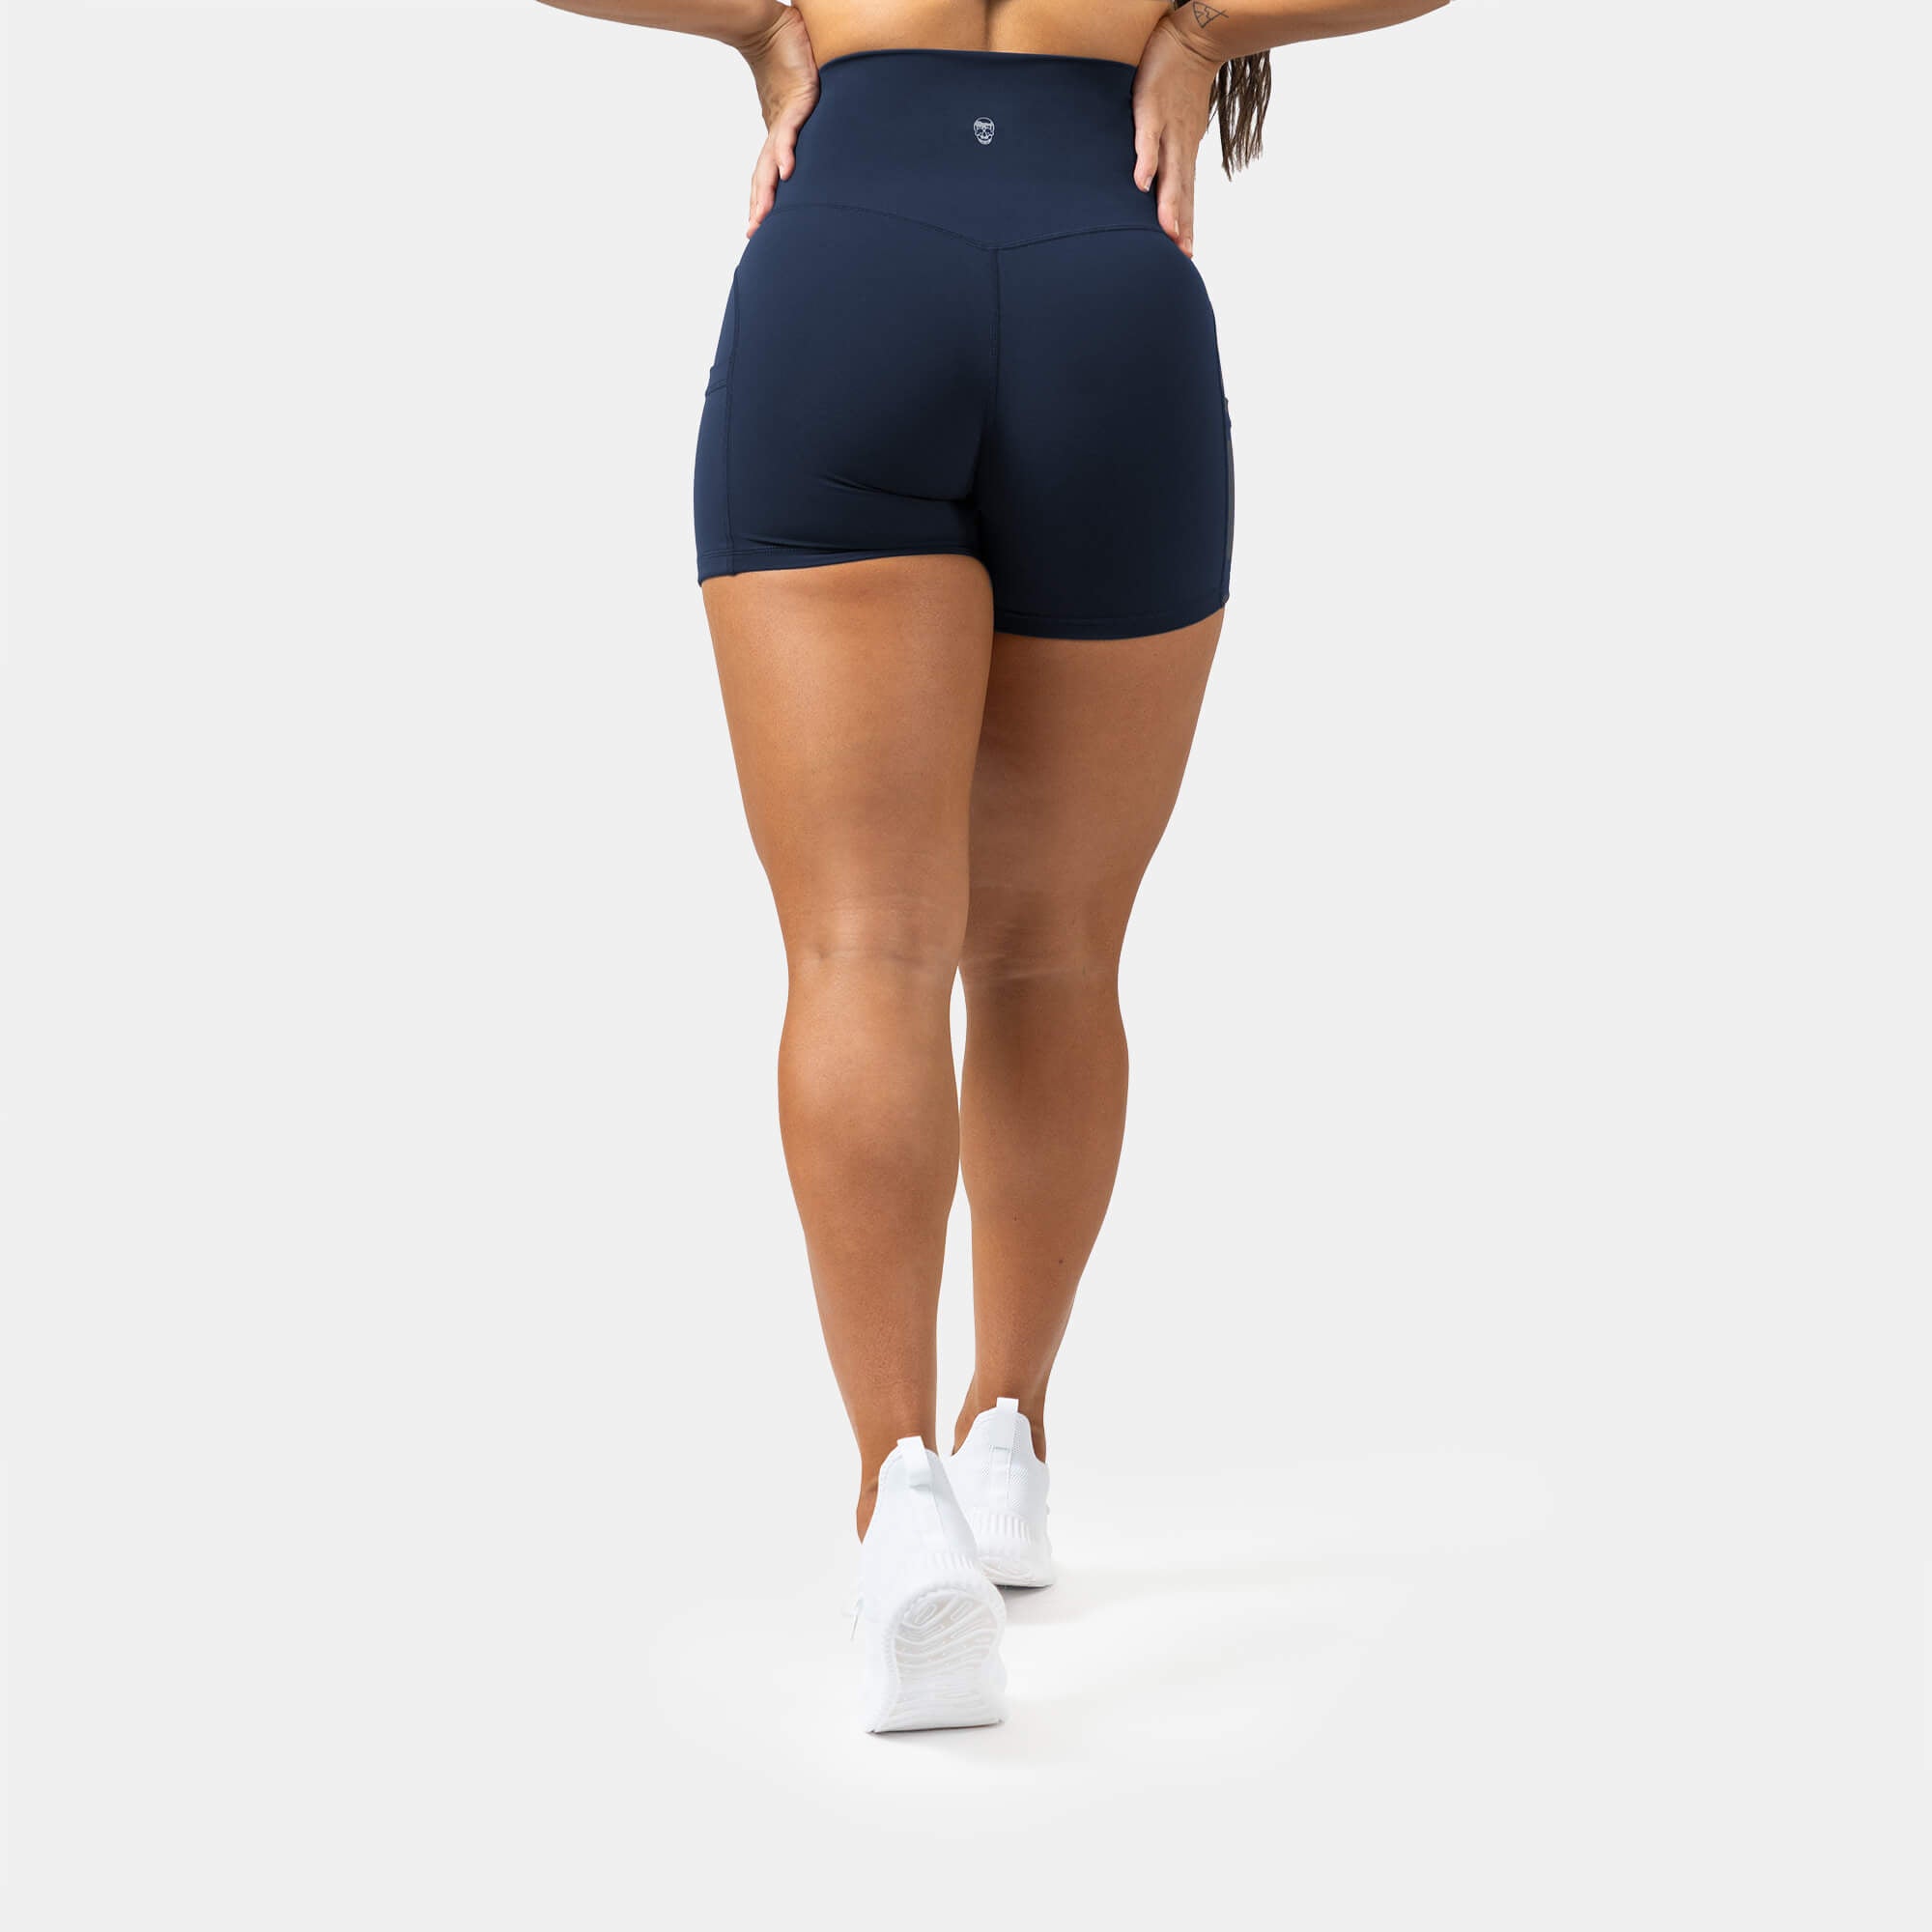 THE GYM PEOPLE Womens' Workout Shorts with Loose Namibia